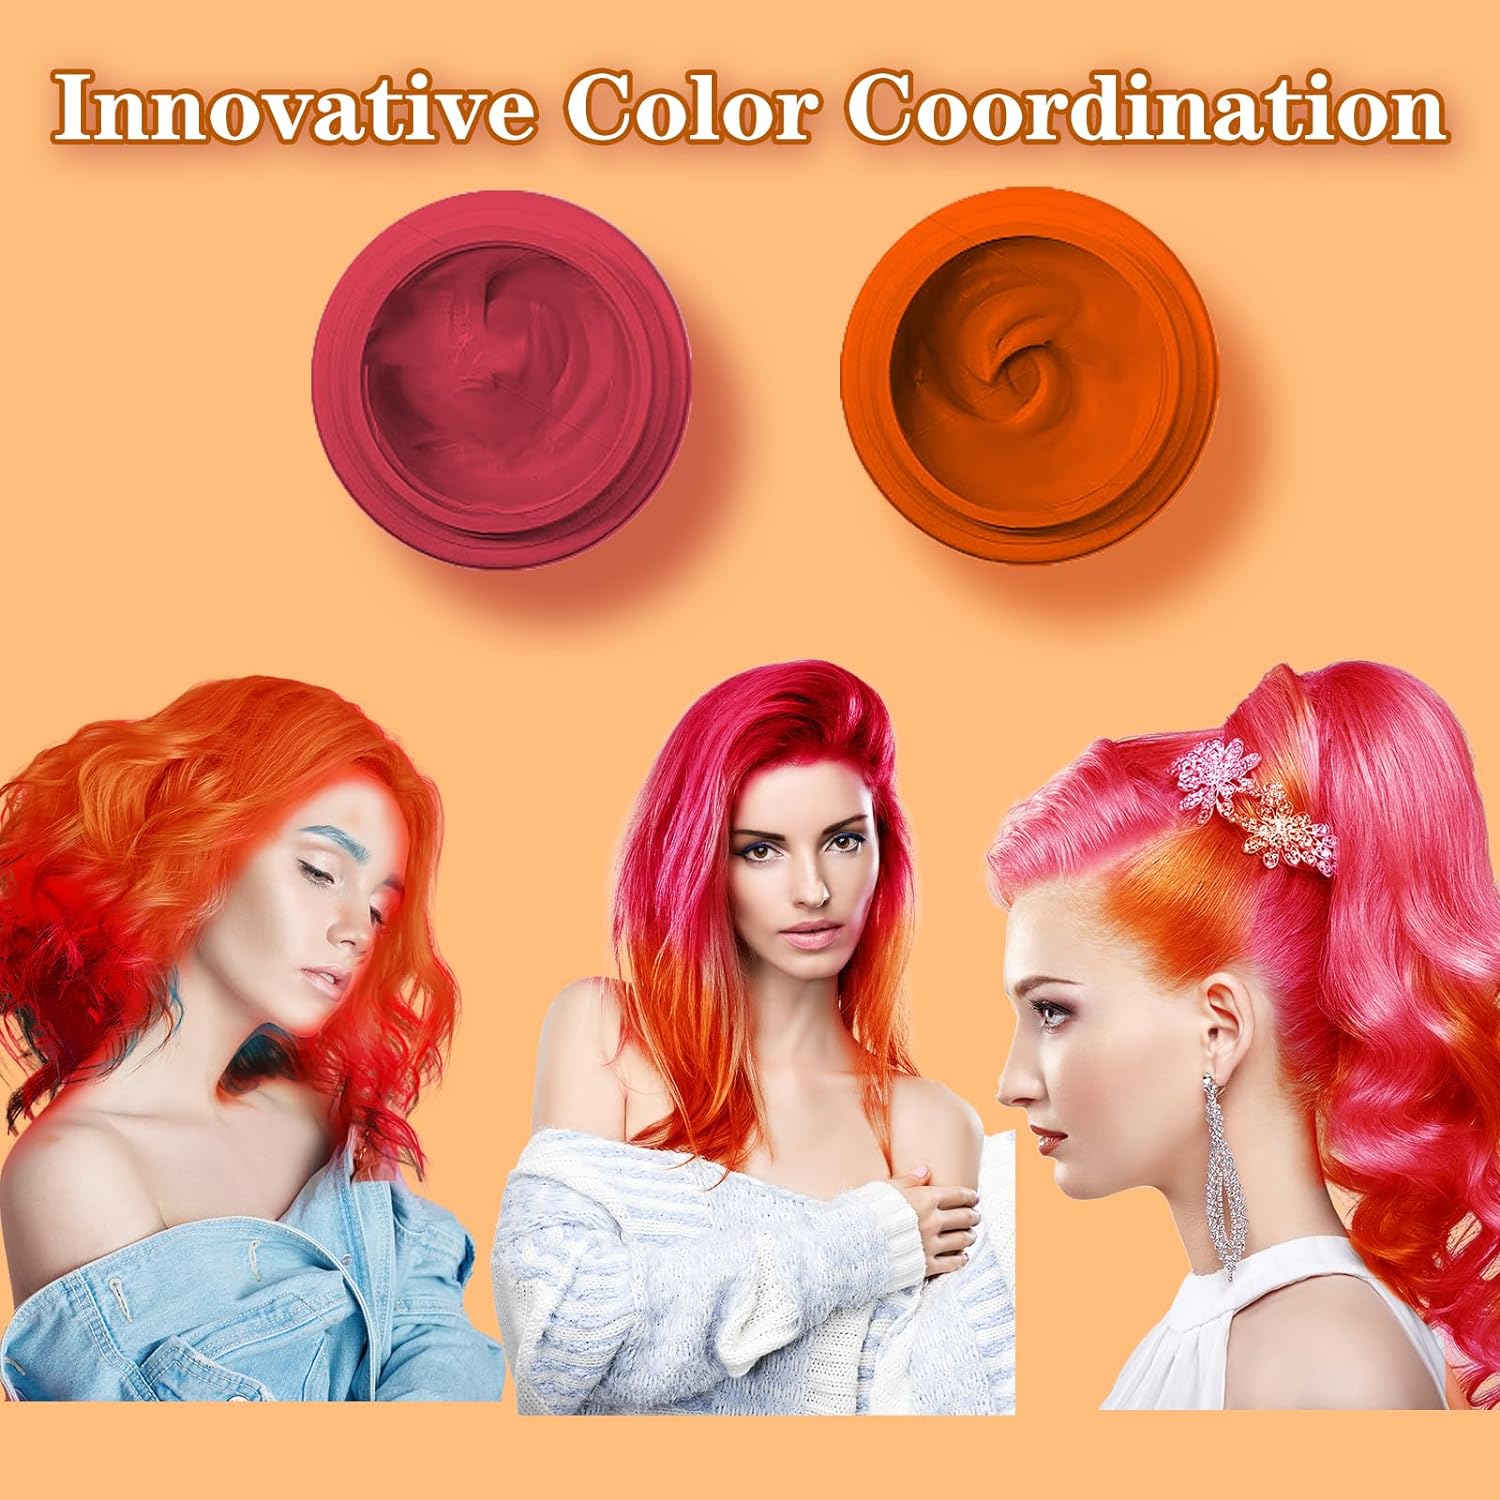 HaiolorPro Hair Color Wax Temporary Washable, Temporary Hair Color Dye for Men Wowen Kids, Hair Makeup Paint Wax for Parties or Cosplay, Hair Coloring Products No Messy (White)